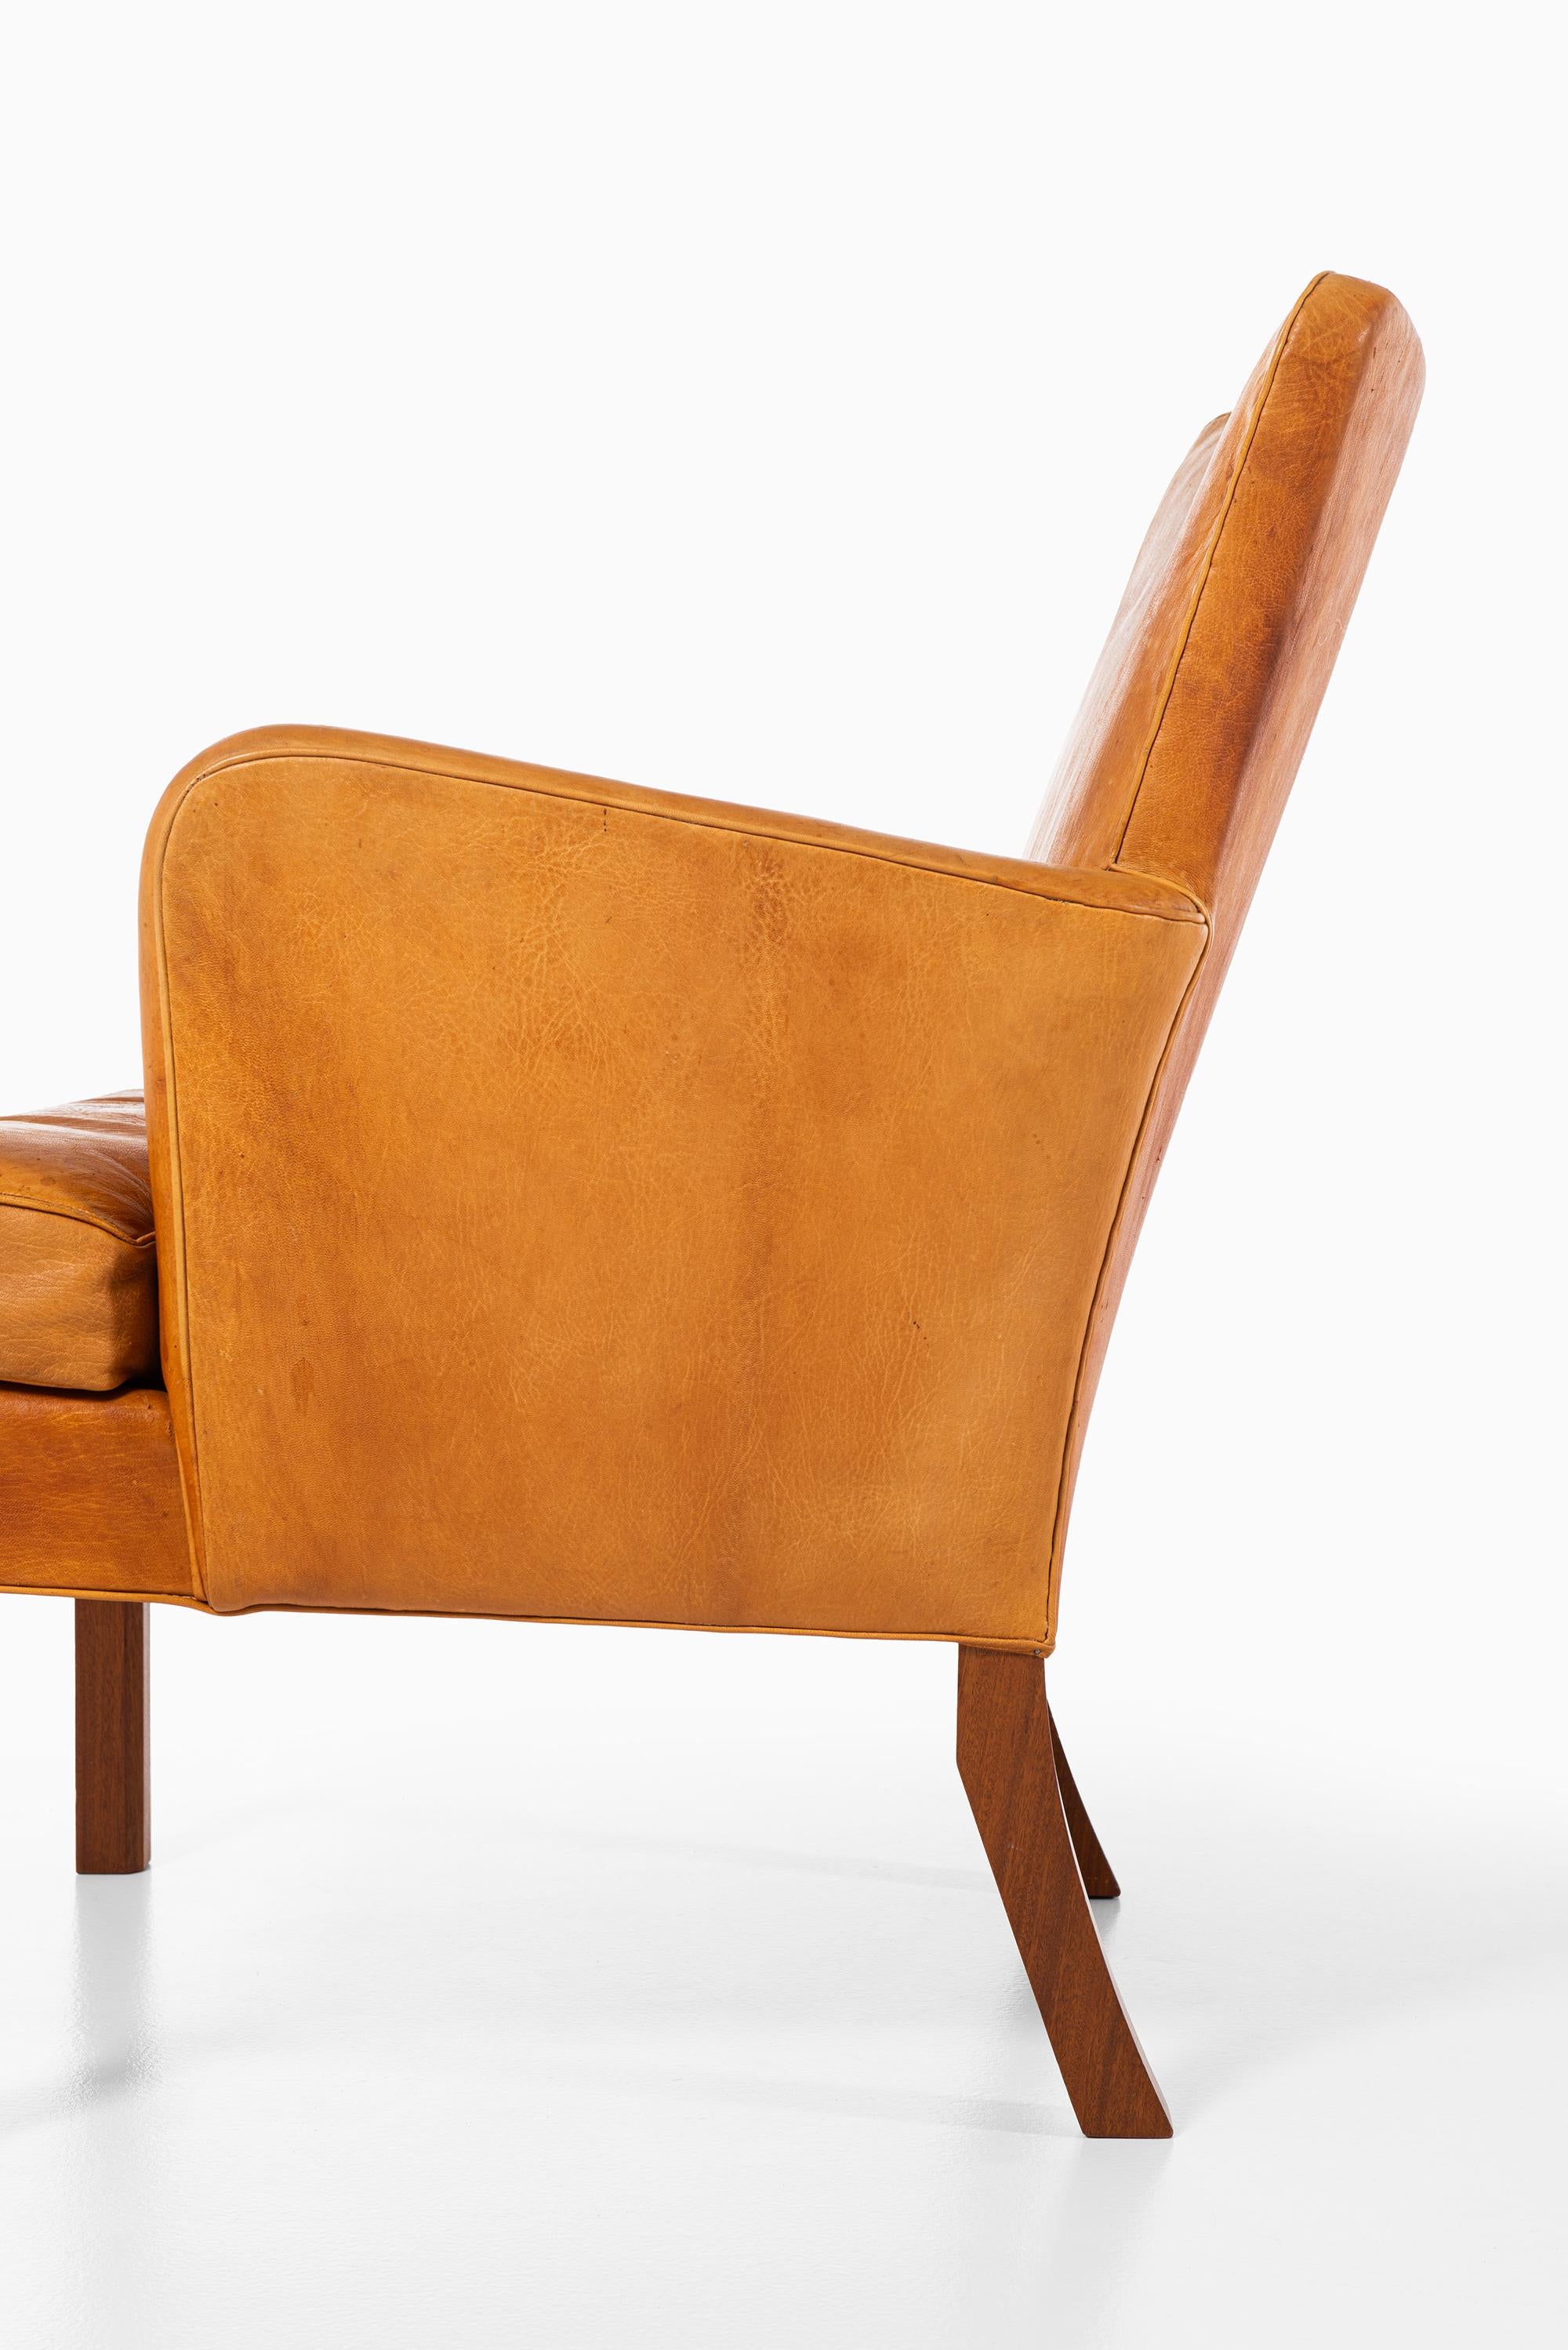 Early 20th Century Kaare Klint Easy Chairs Model 5313 Produced by Rud. Rasmussen in Denmark For Sale